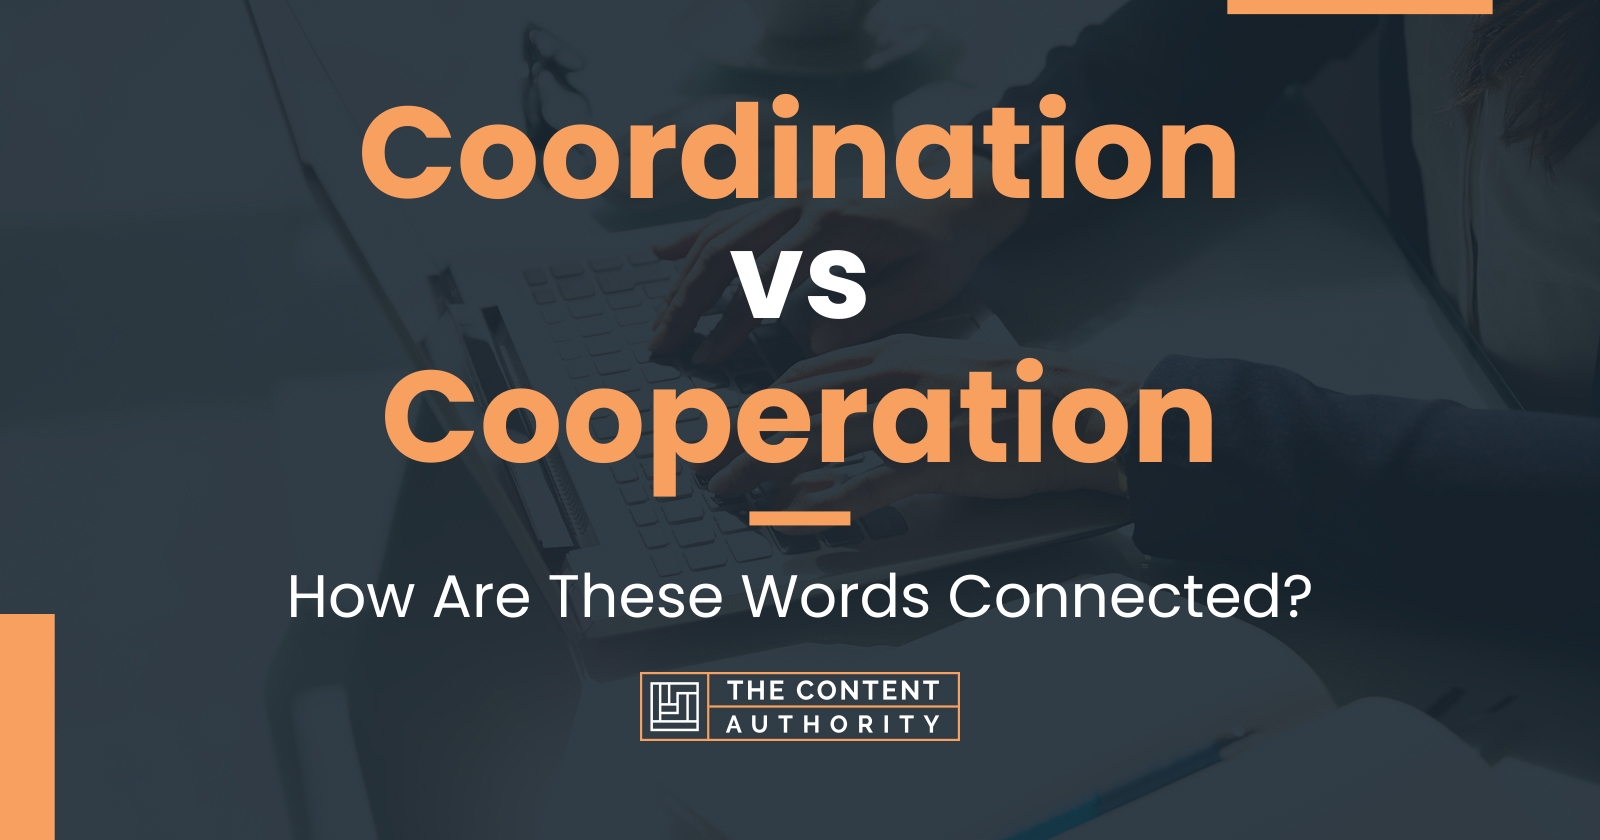 Coordination vs Cooperation: How Are These Words Connected?